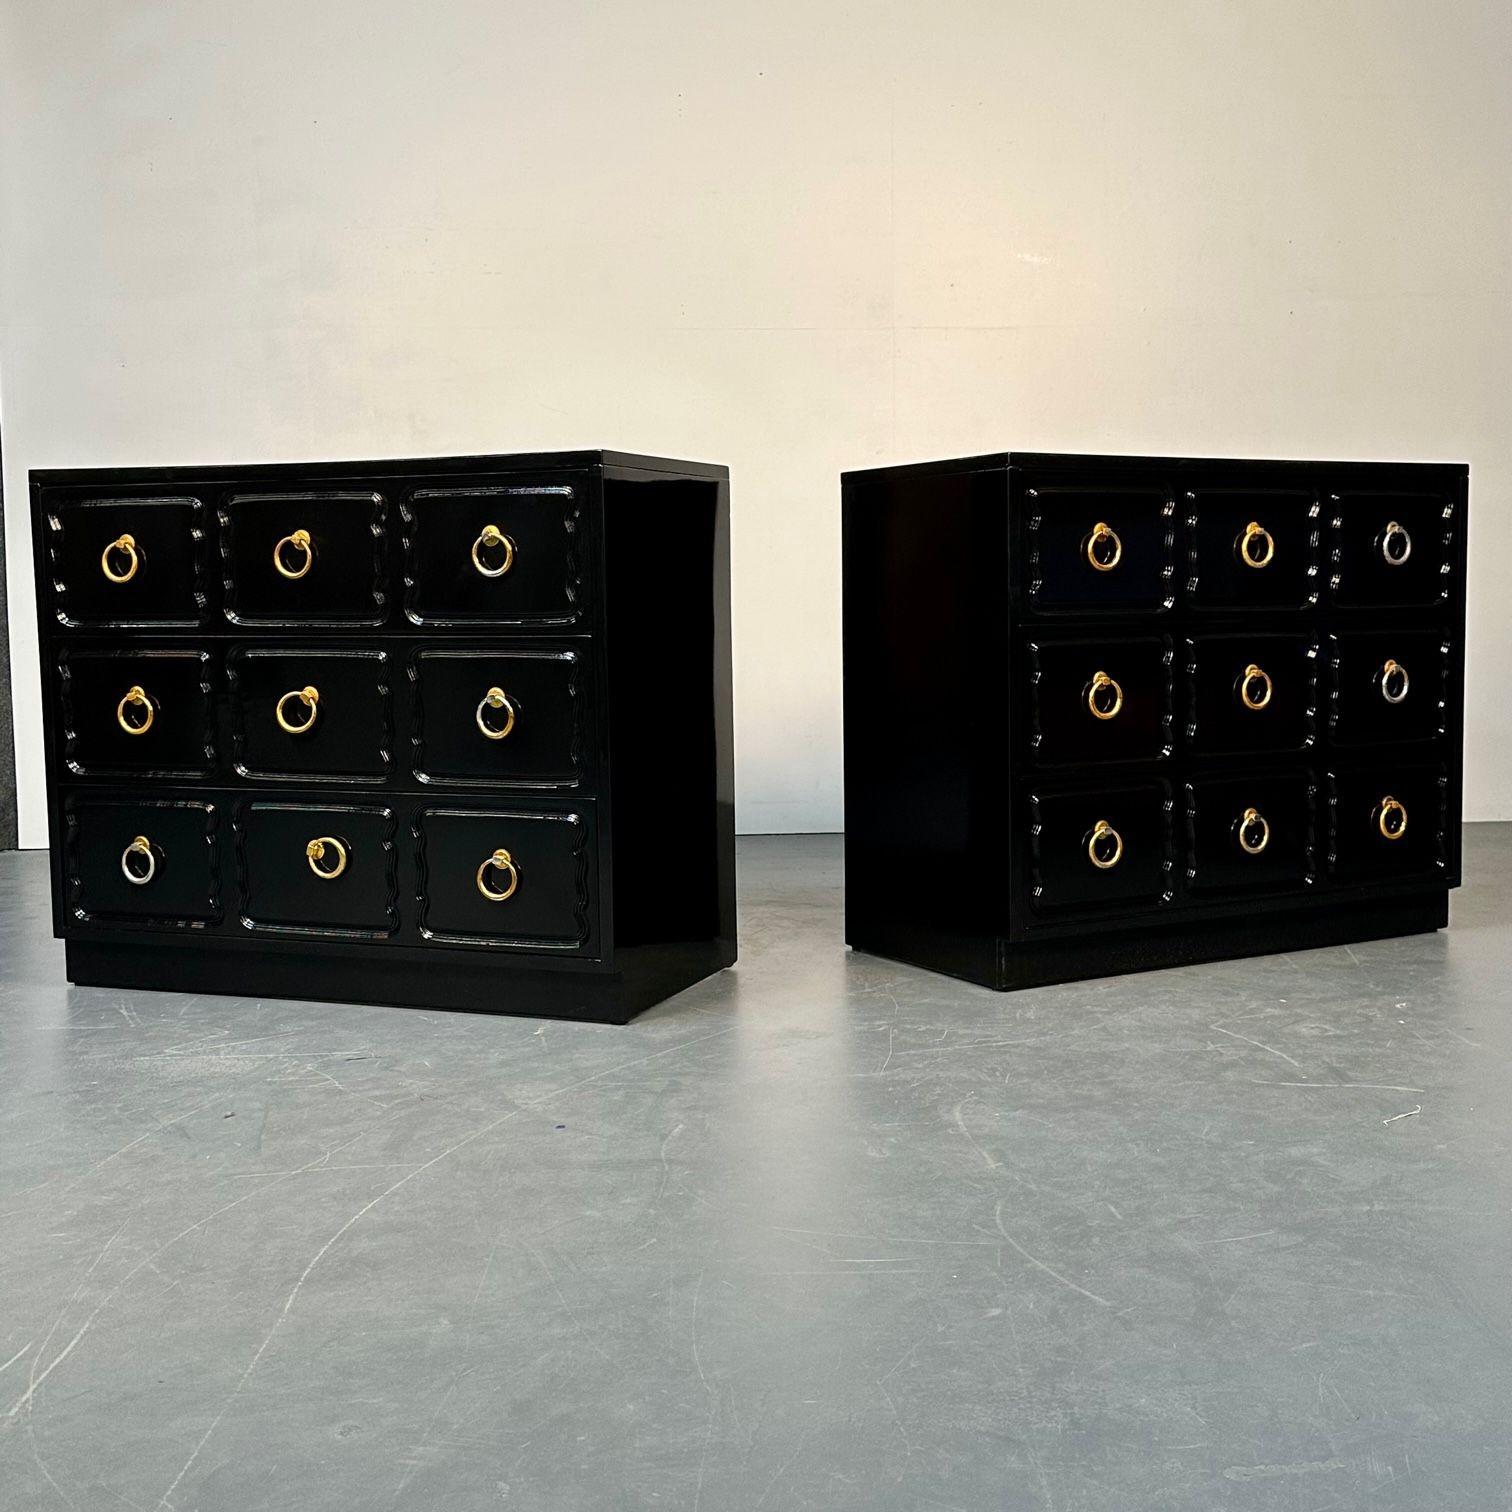 Pair Dorothy draper for Heritage Style Espana chests, nightstands, black lacquer
A fine pair of fully refinished black lacquered chest or bedside stands in the manner of Dorothy Draper for Heritage. This pair of Espana chests are simply timeless